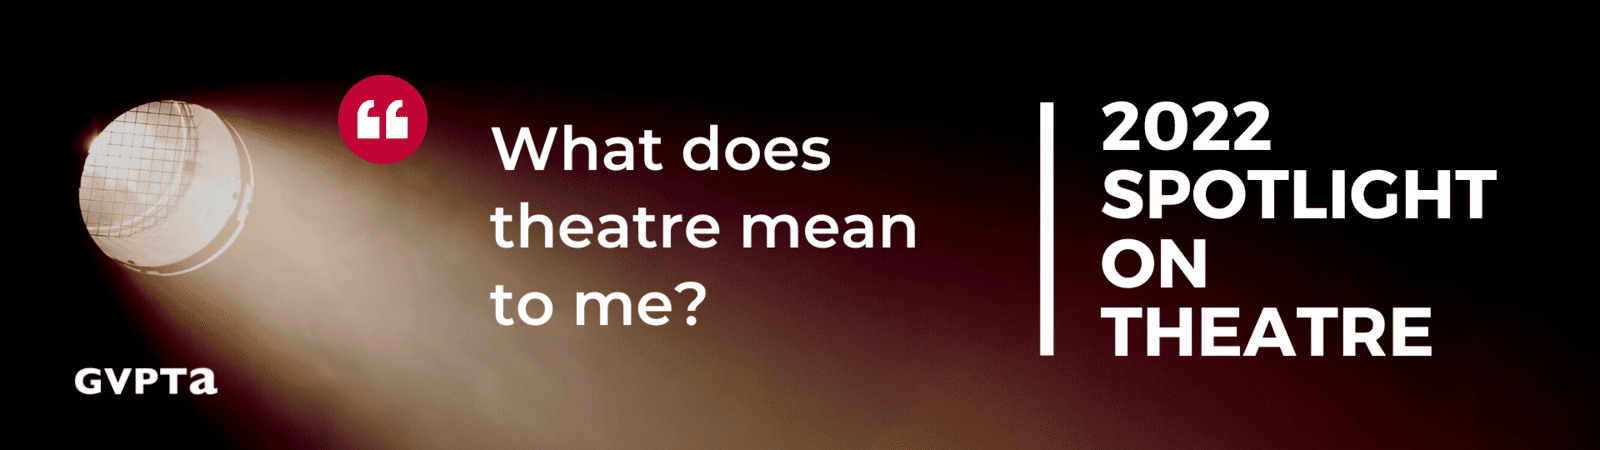 White text "What does theatre mean to me? 2022 Spotlight on Theatre with GVPTA logo on dark background with spotlight shining from the left